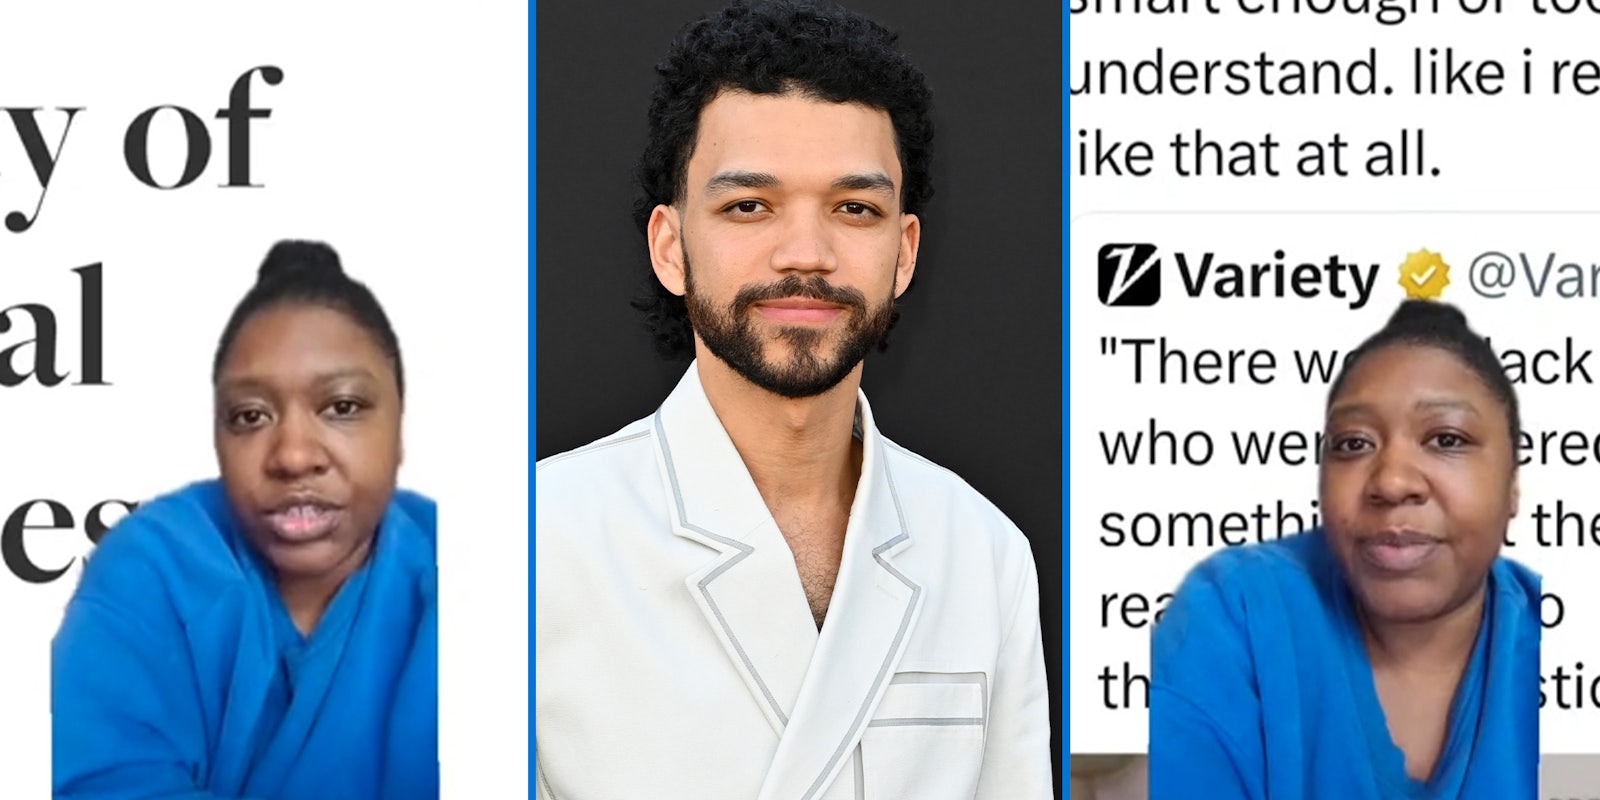 Black people are turned off by ‘The American Society of Magical Negroes’ and star Justice Smith’s comments